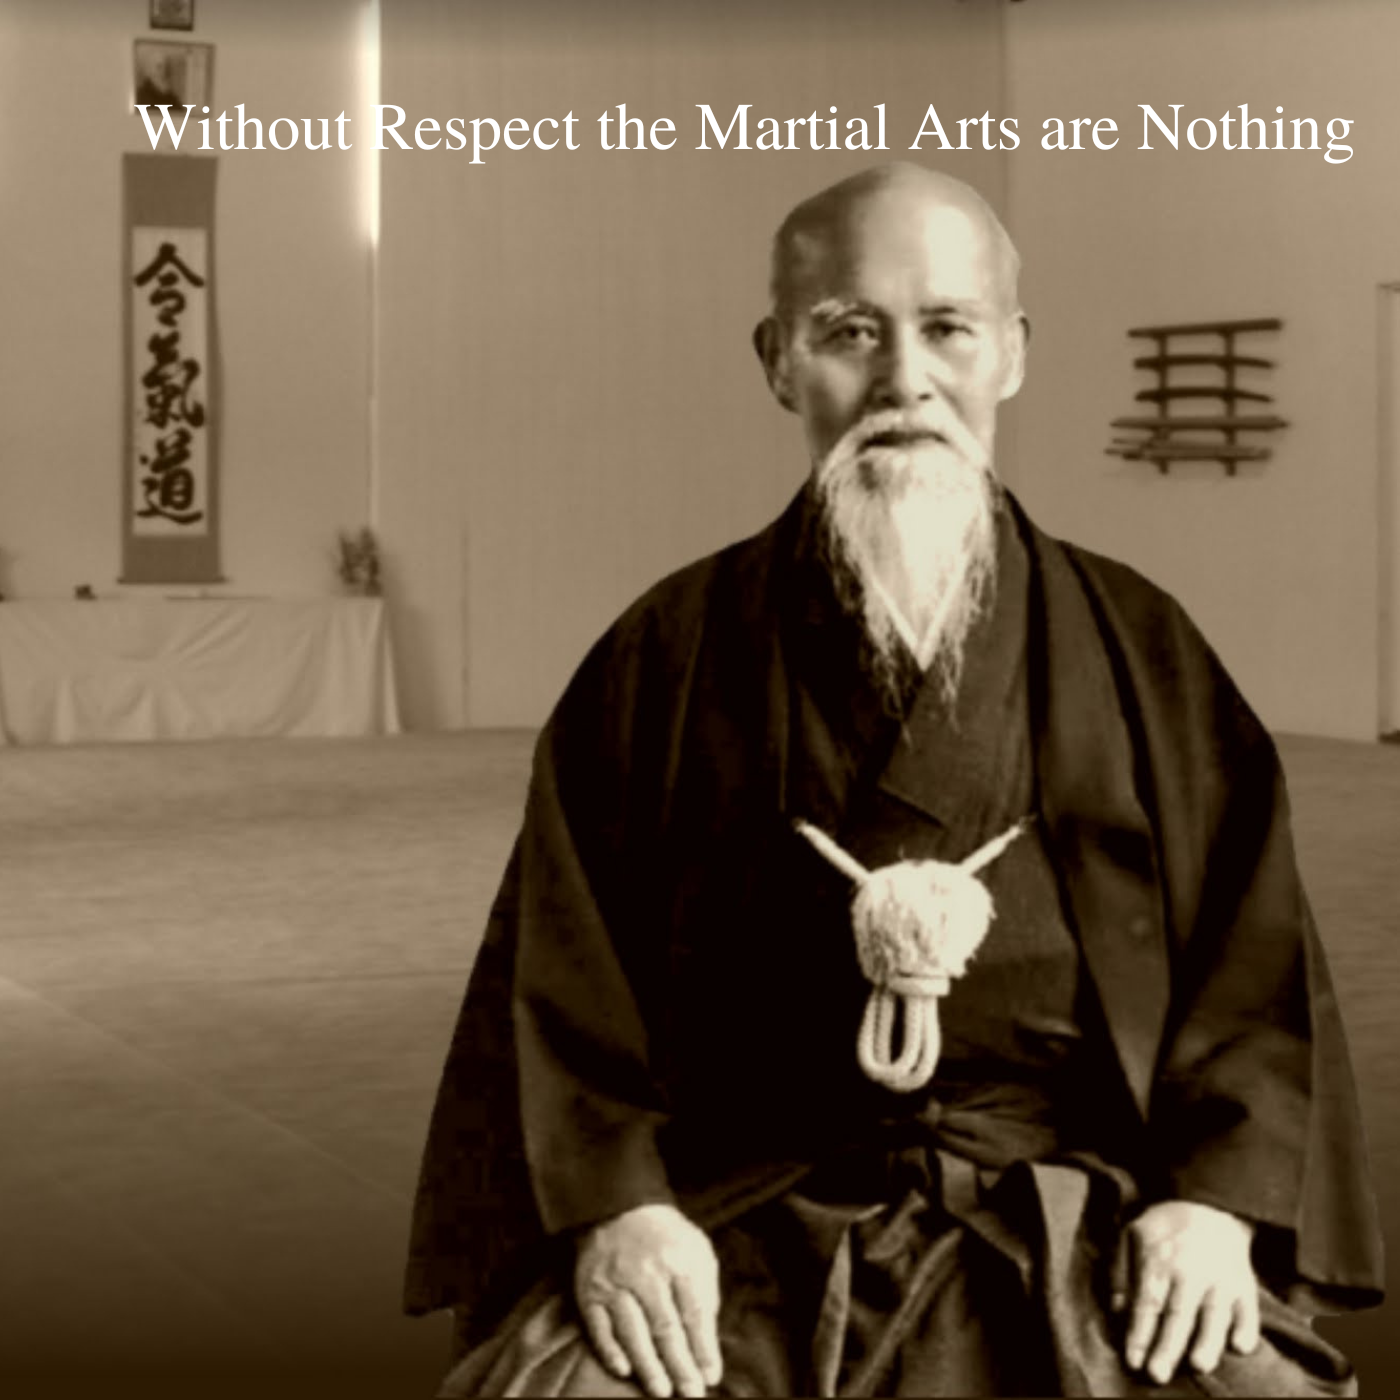 Without Respect the Martial Arts are Nothing